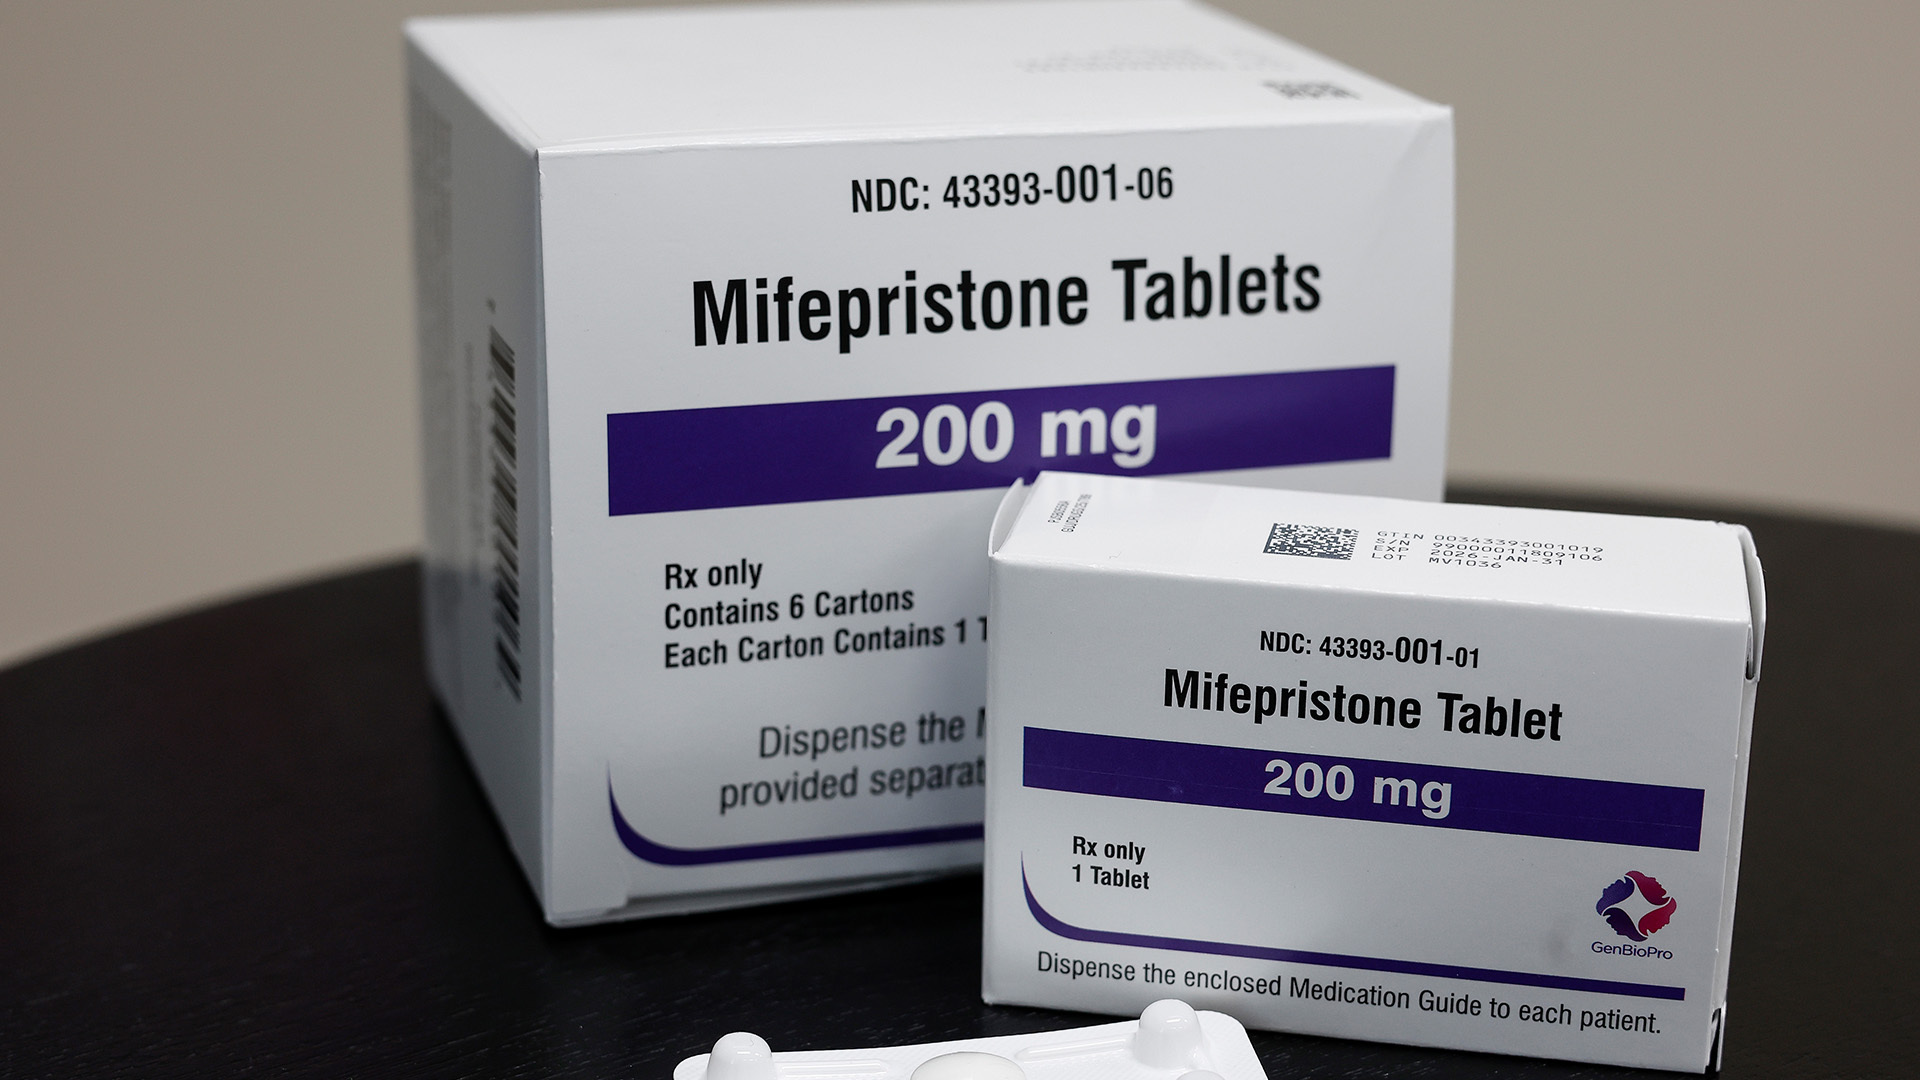 The controversy over the abortion pill mifepristone continues after key studies influencing its FDA revocation were retracted.